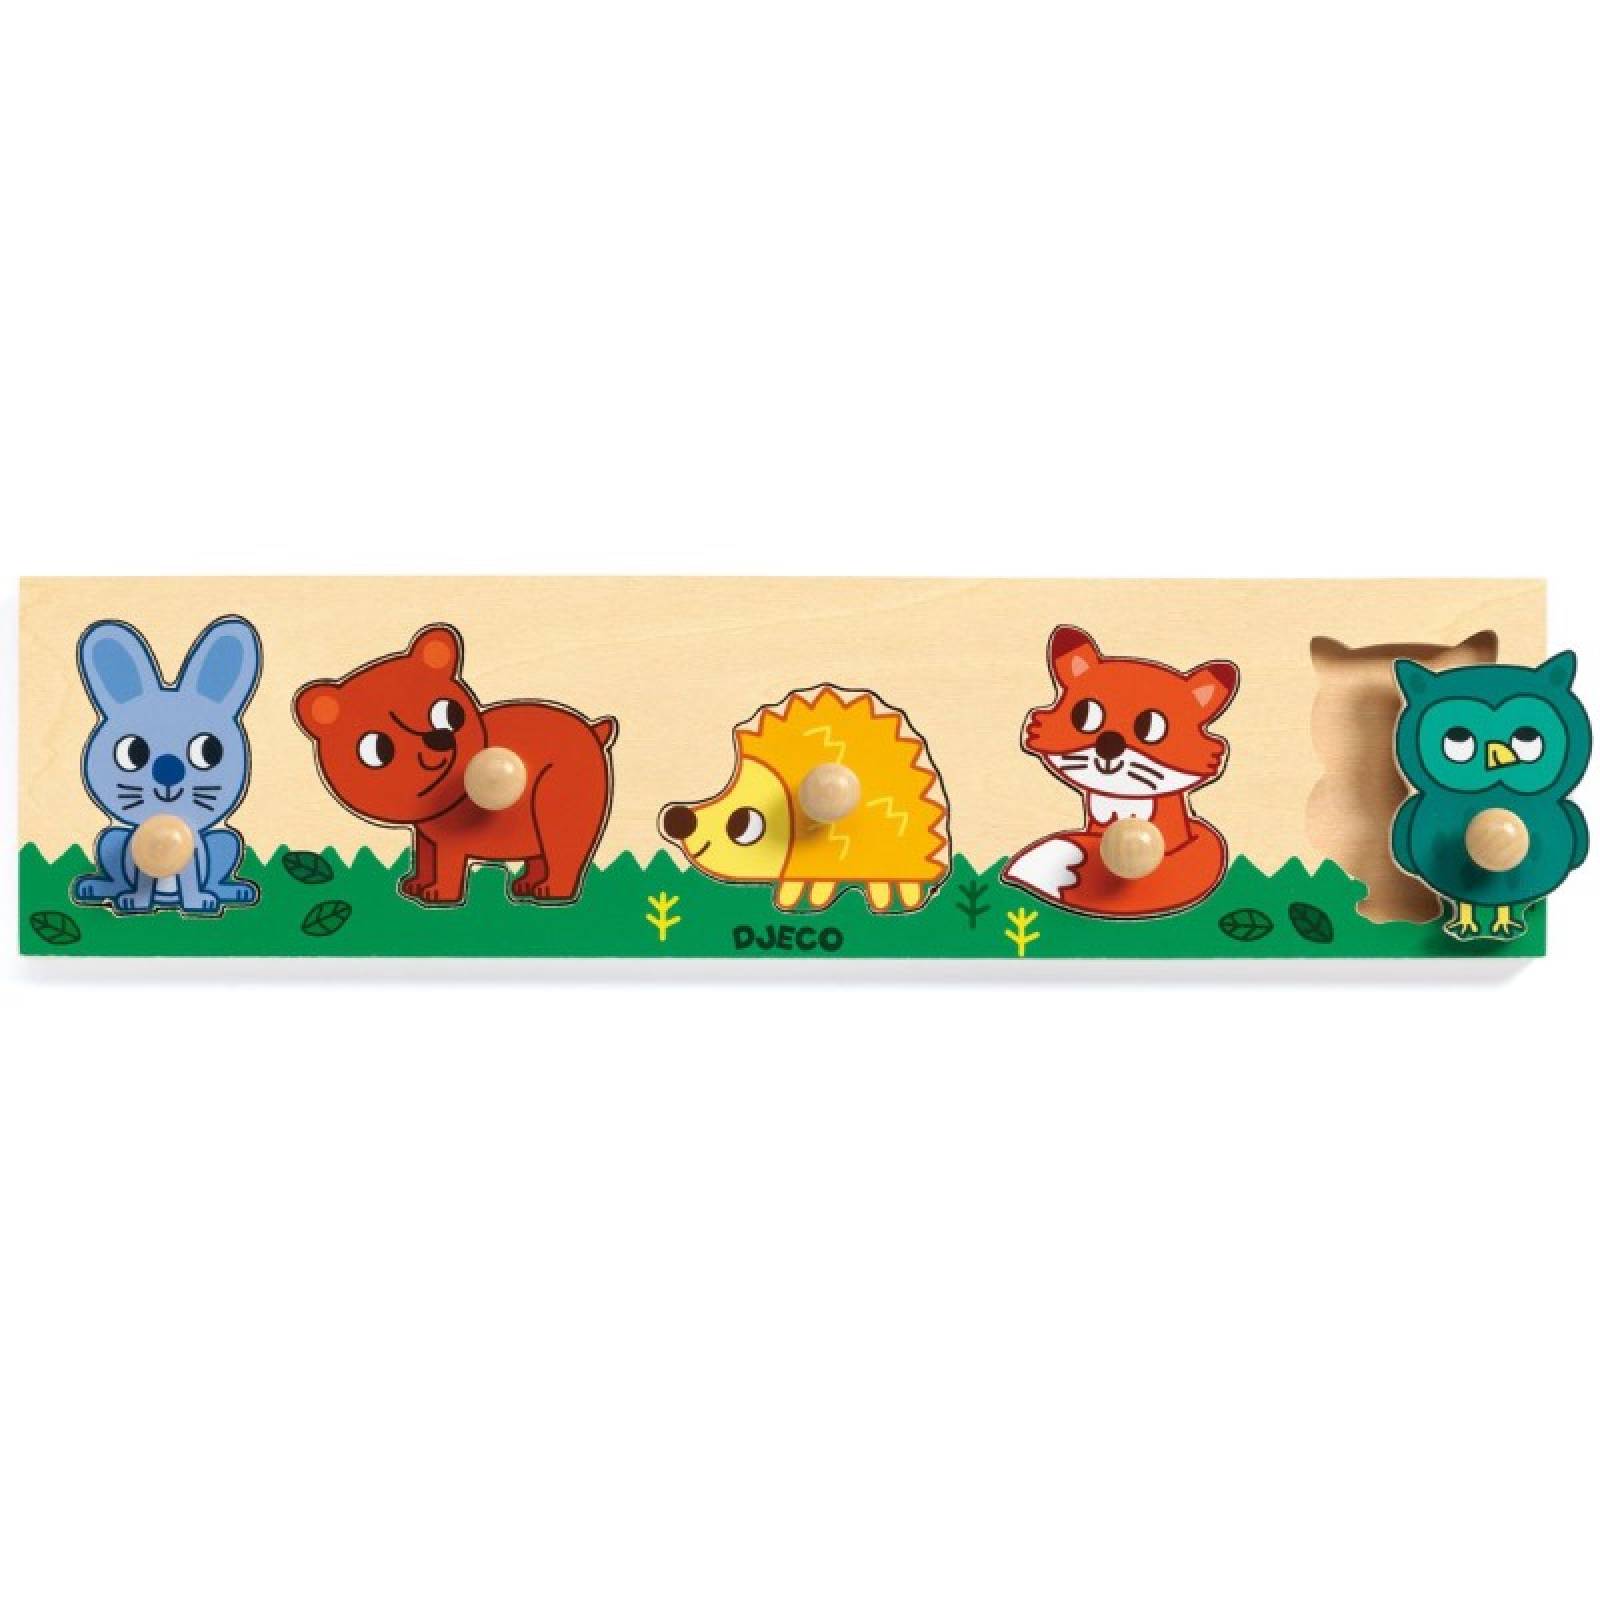 Forest'n'co Wooden Peg Puzzle By Djeco 1+ thumbnails